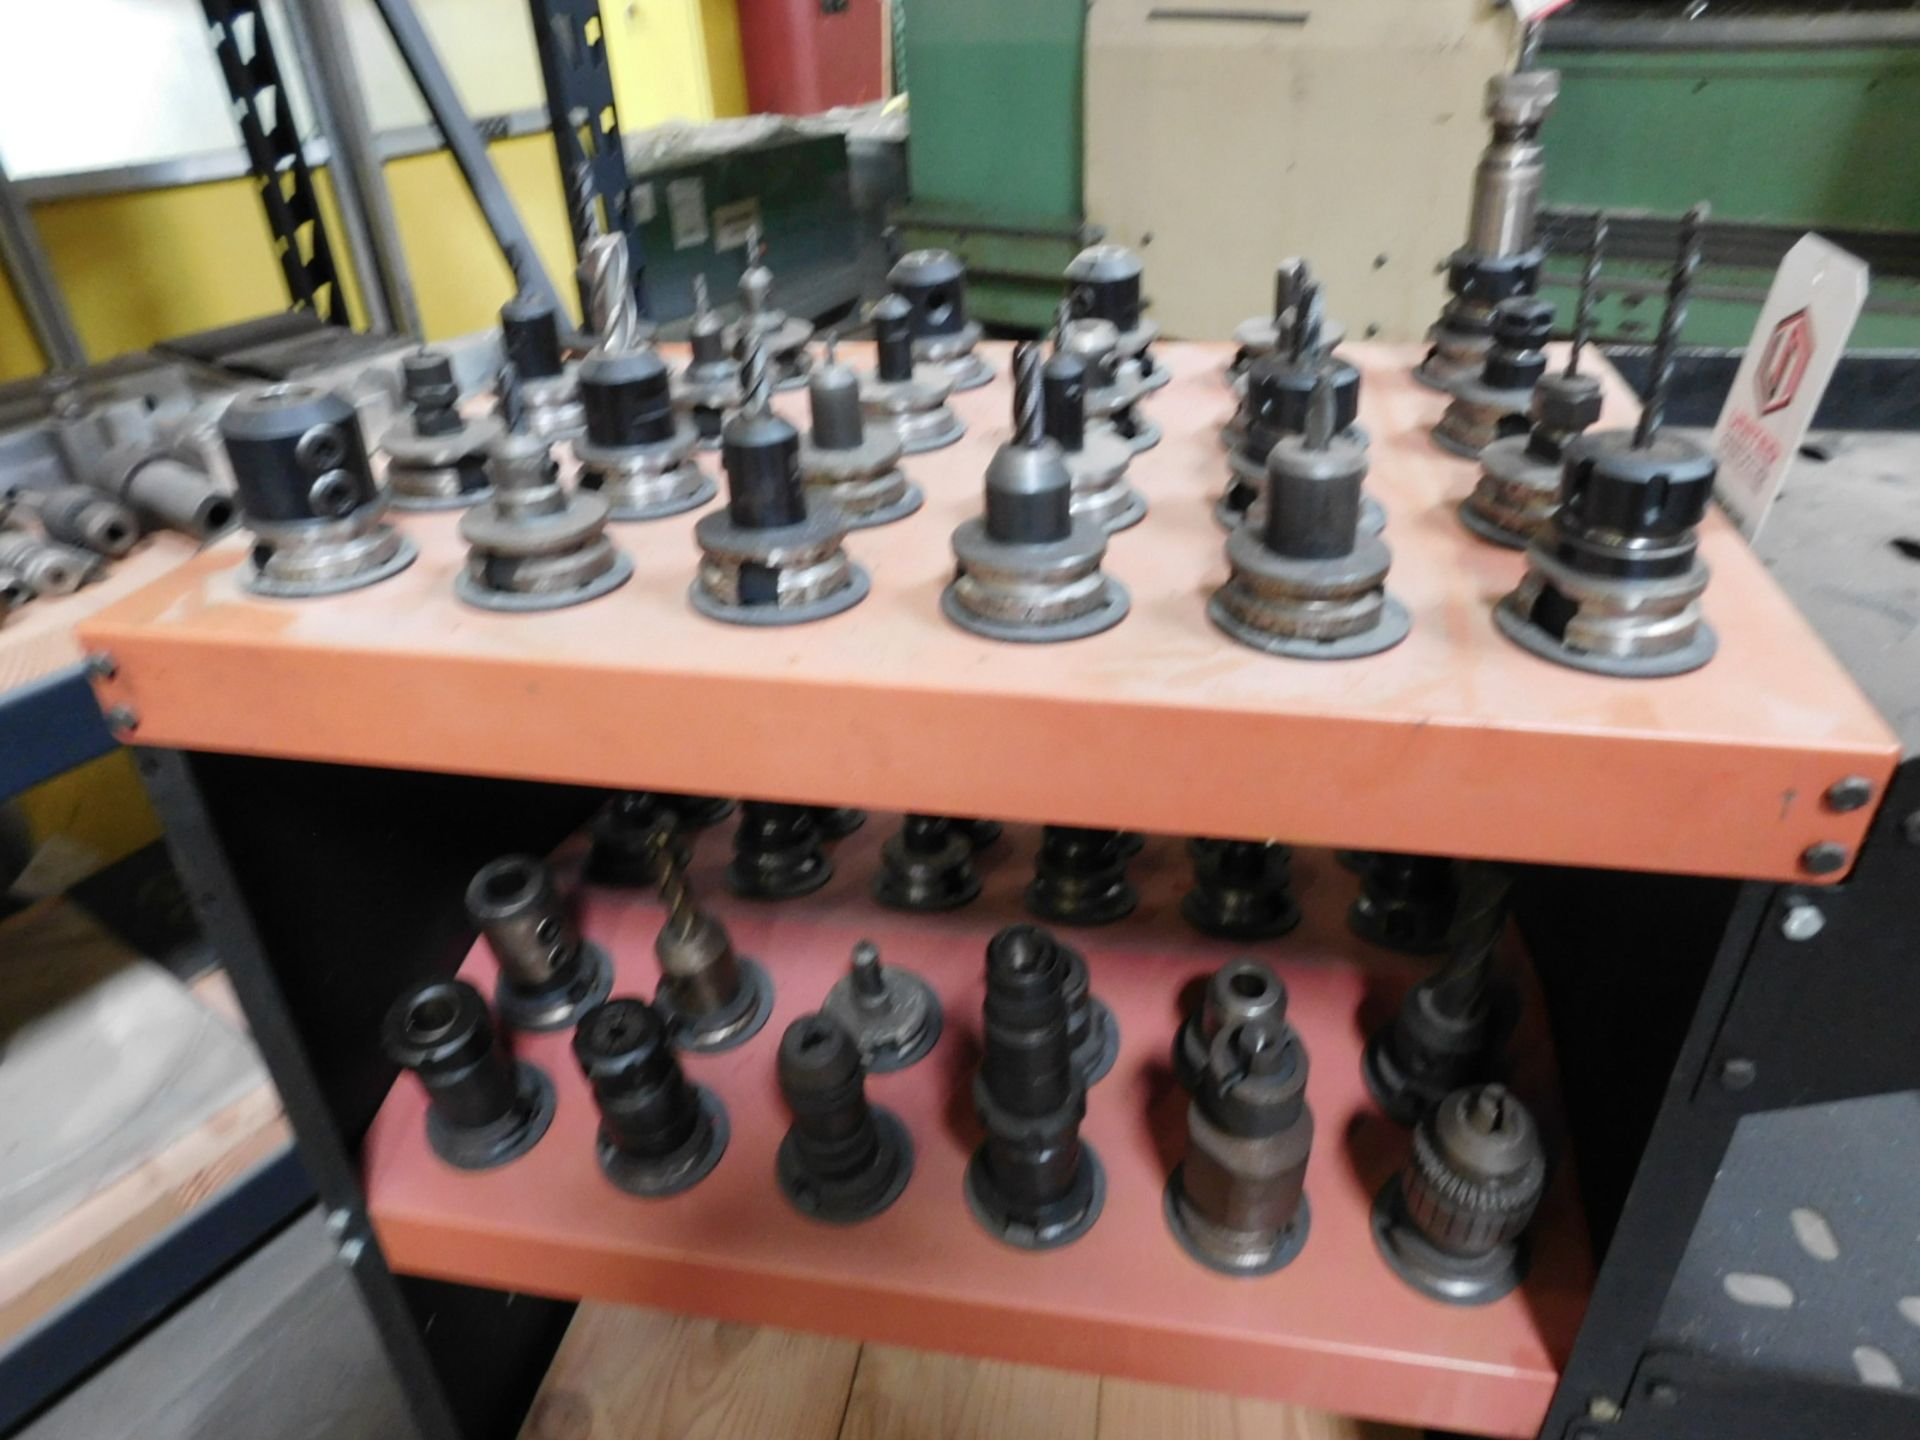 LOT - CNC TOOL CART, W/ APPROX. (48) 30 TAPER TOOL HOLDERS, MOST W/ TOOLS INSERTED - Image 2 of 2